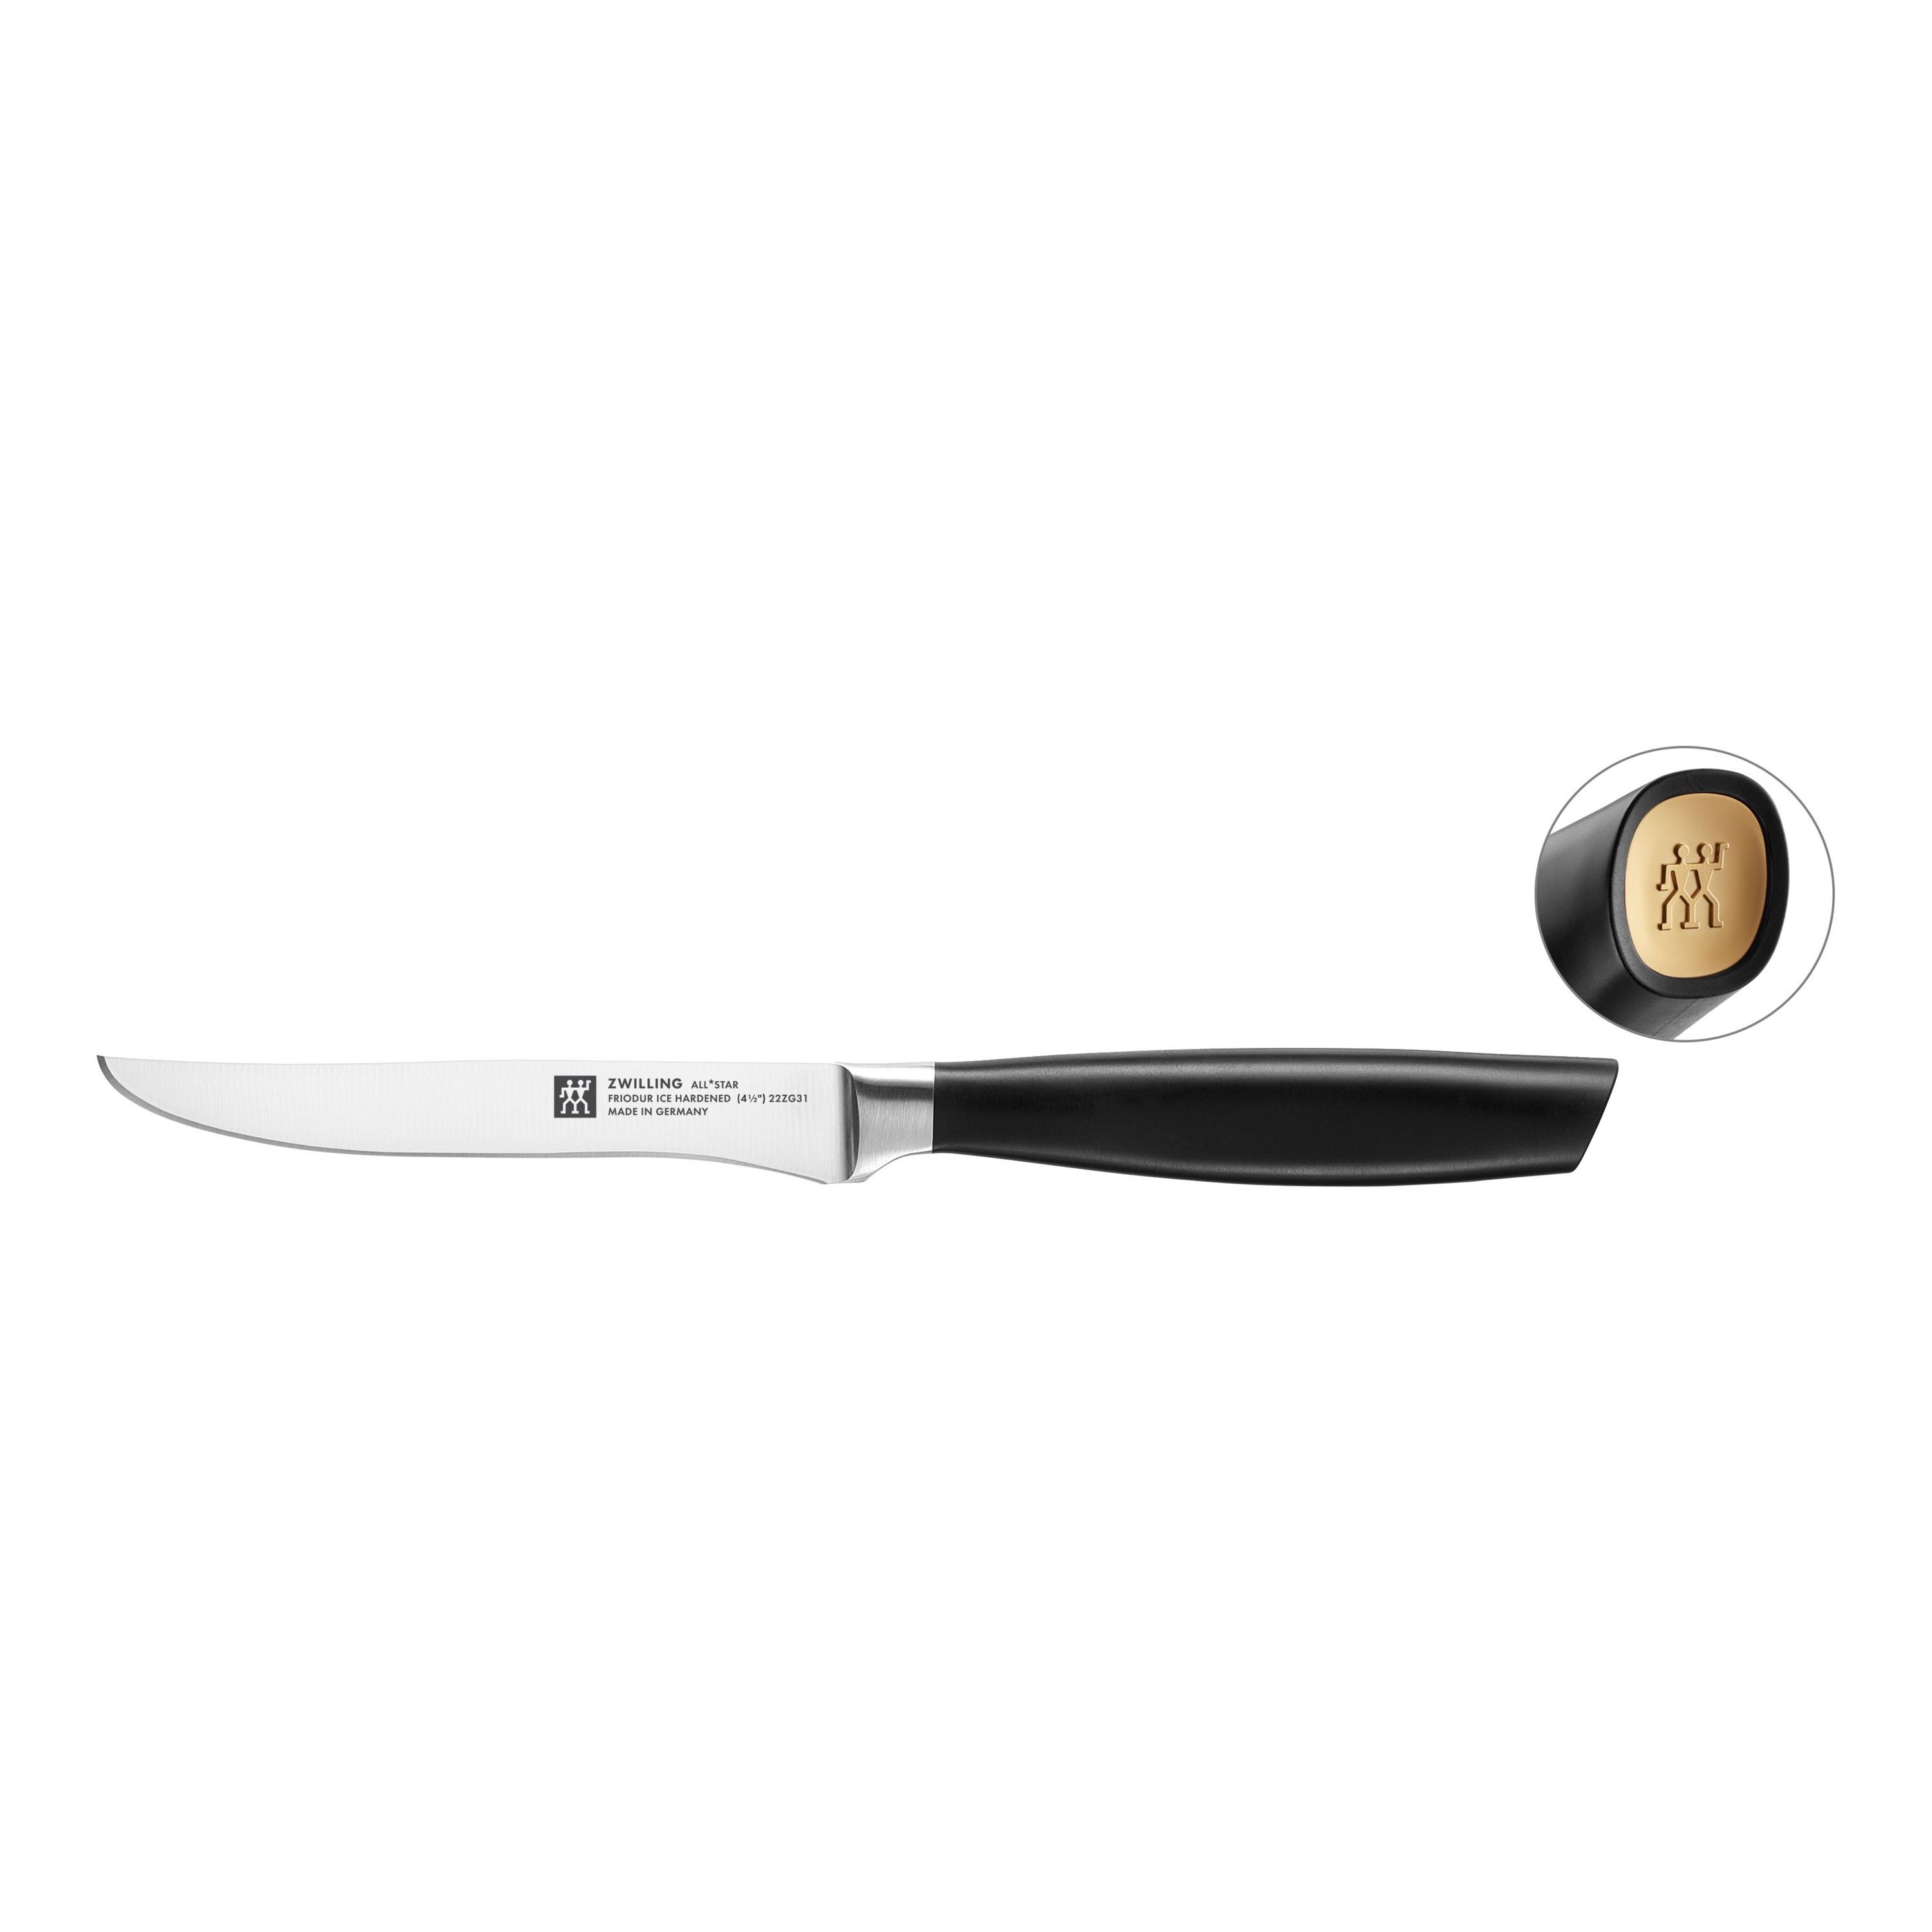 ZWILLING All * Star Couteau à steak 12 cm, or mat